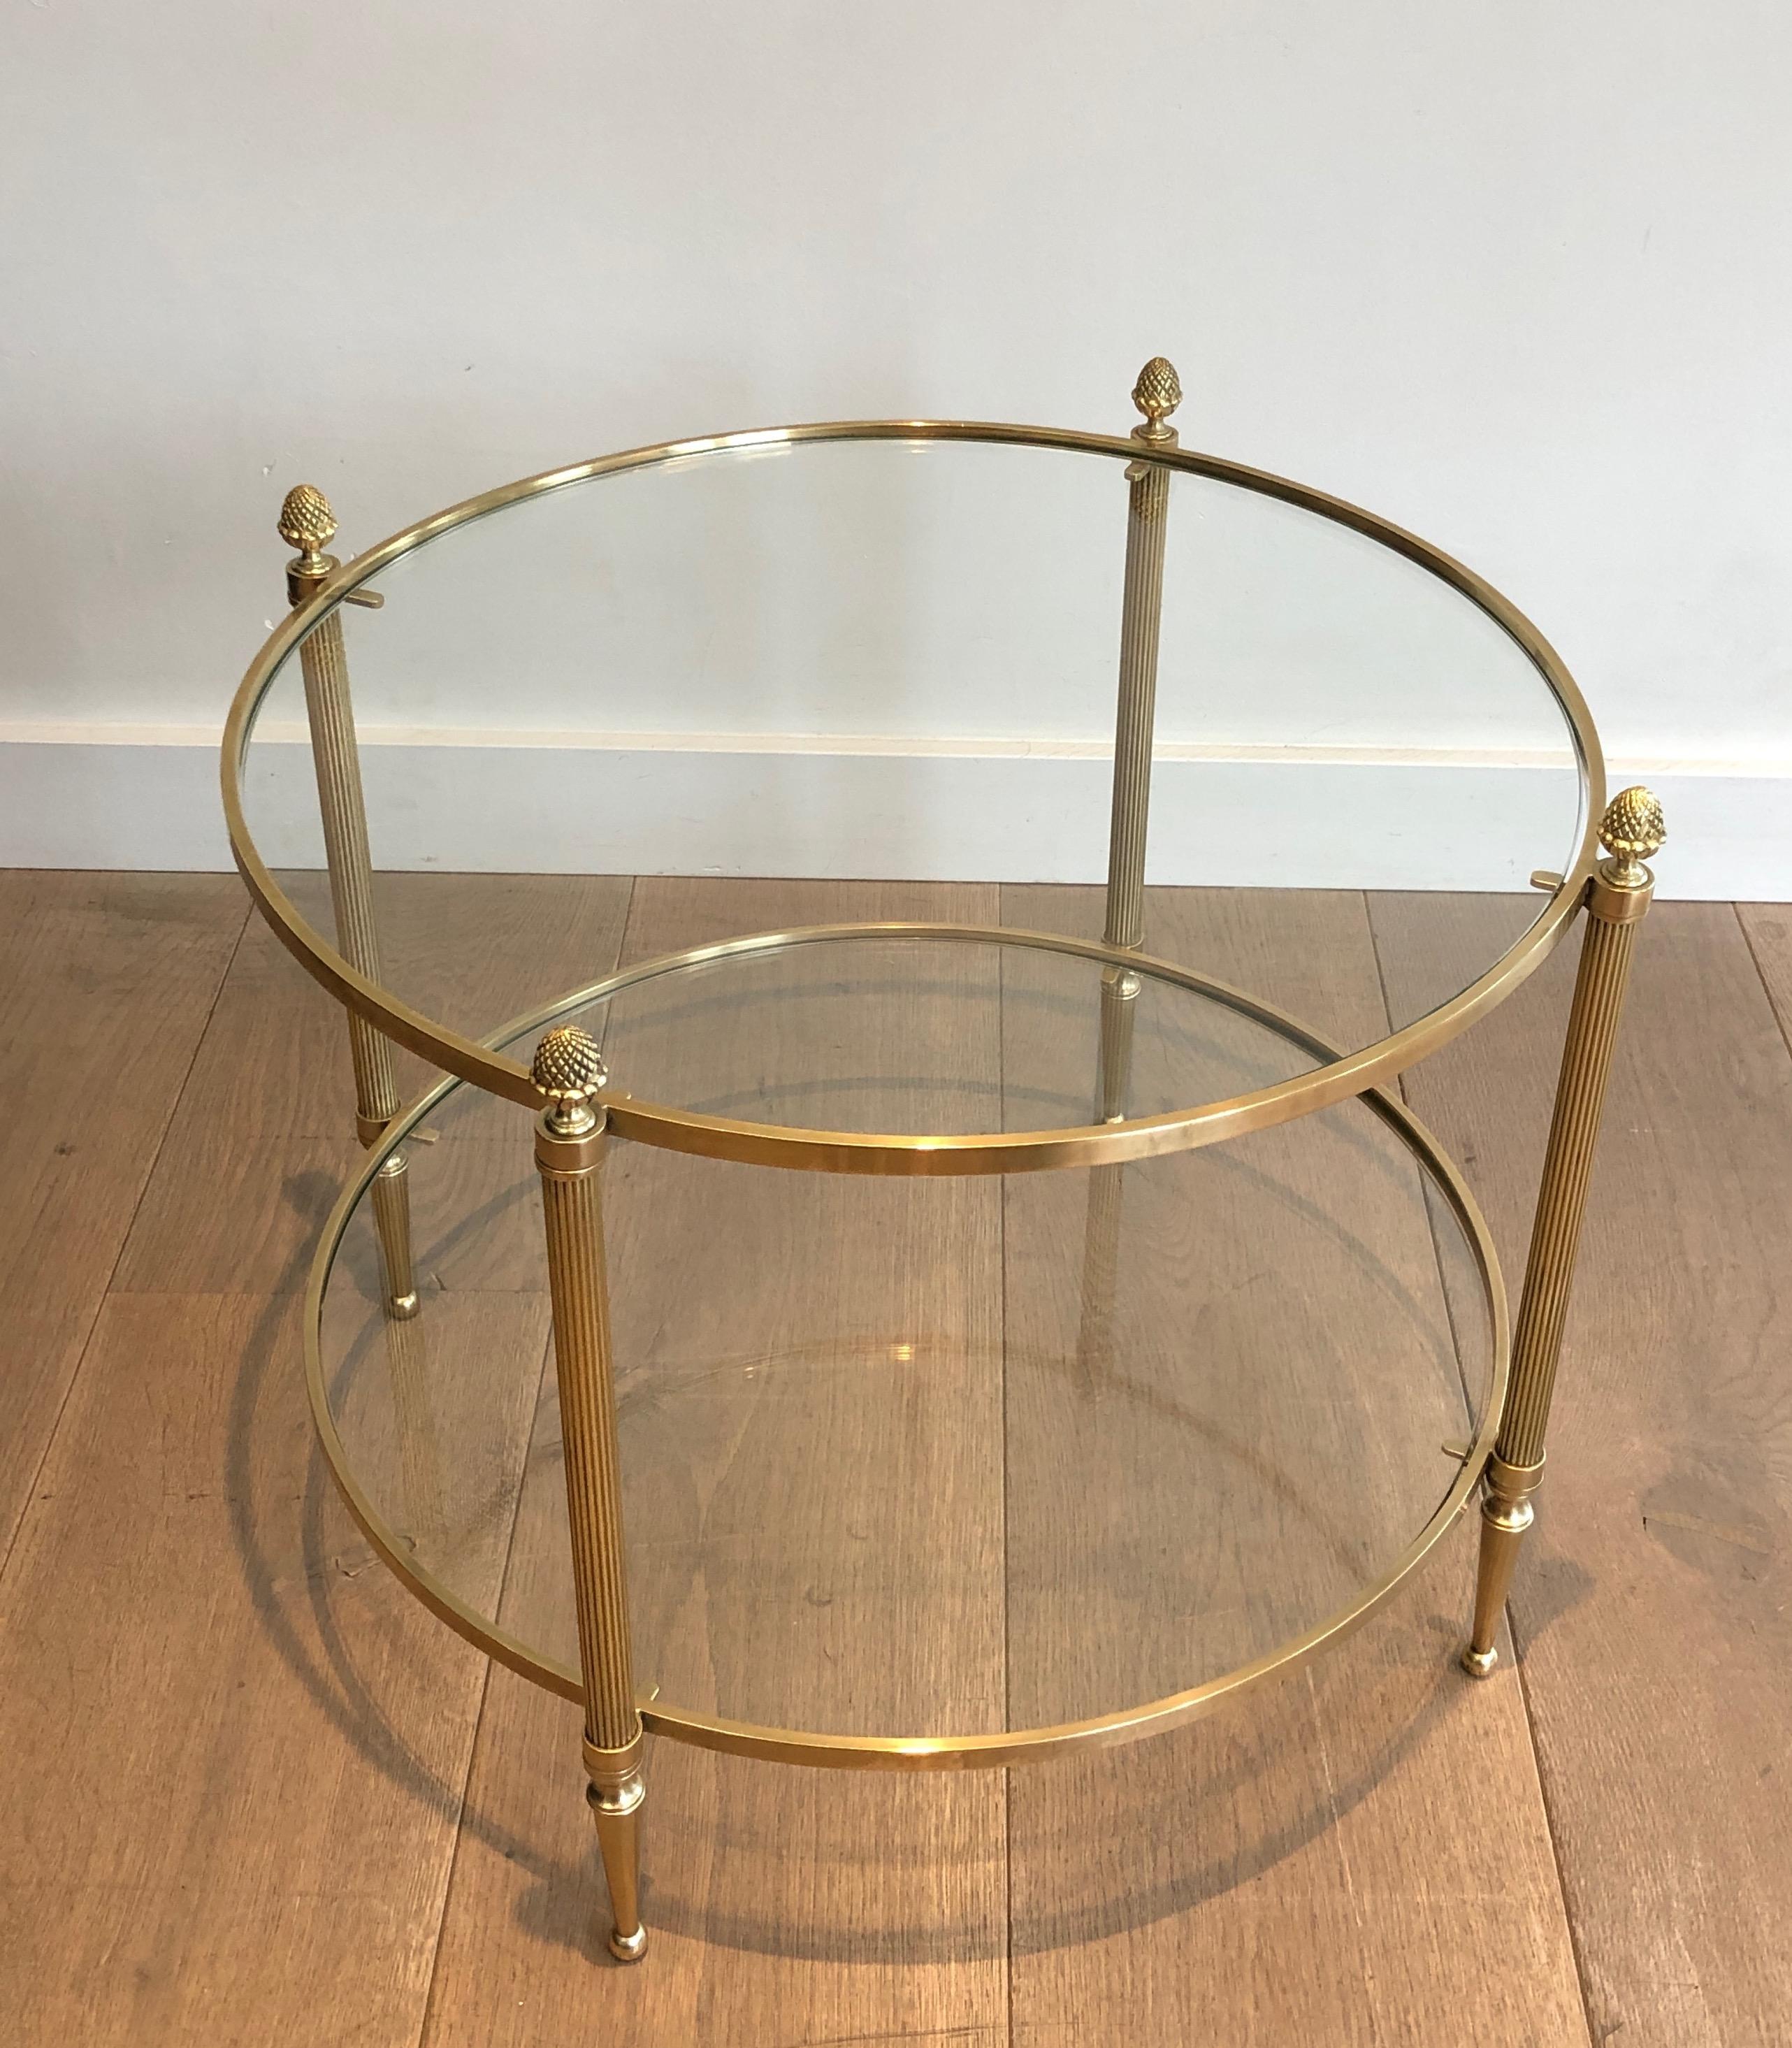 This nice and rare small round coffee table is made of brass with glass shelves and bronze finials. This is a French work by famous Maison Baguès. Circa 1940